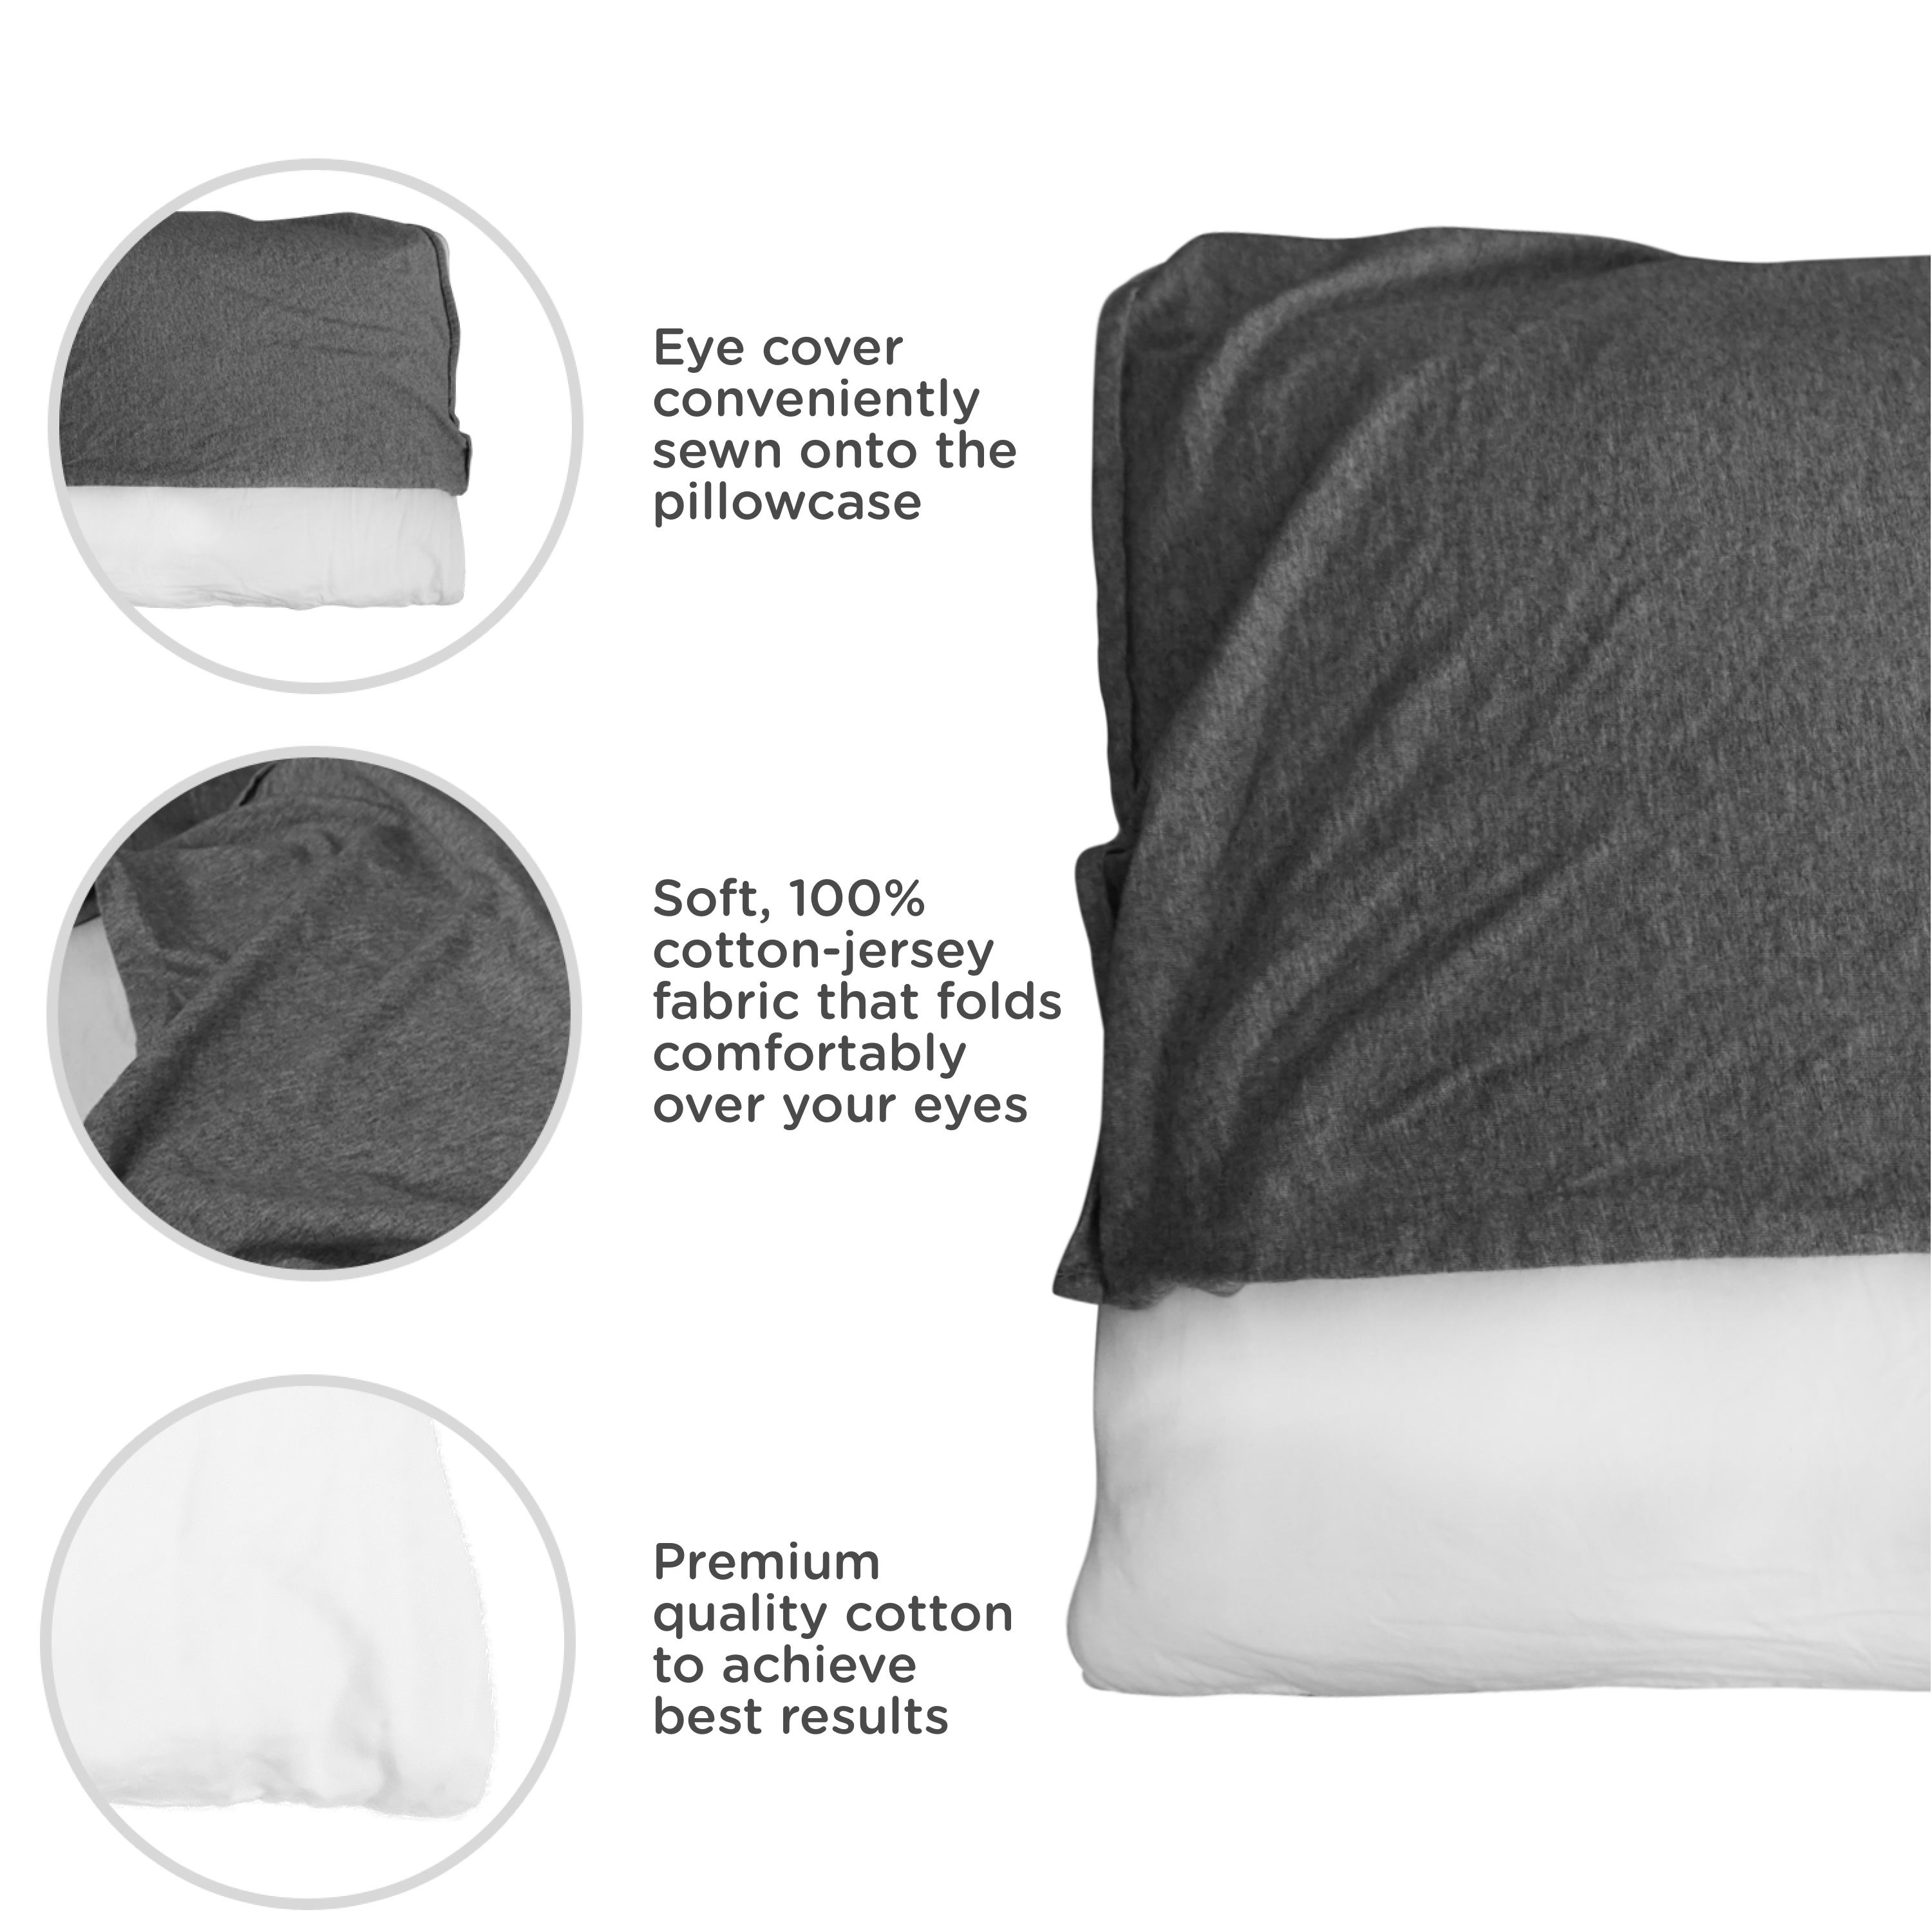 Eye Covers for Sleeping is a Viable Alternative to Sleeping Masks ...